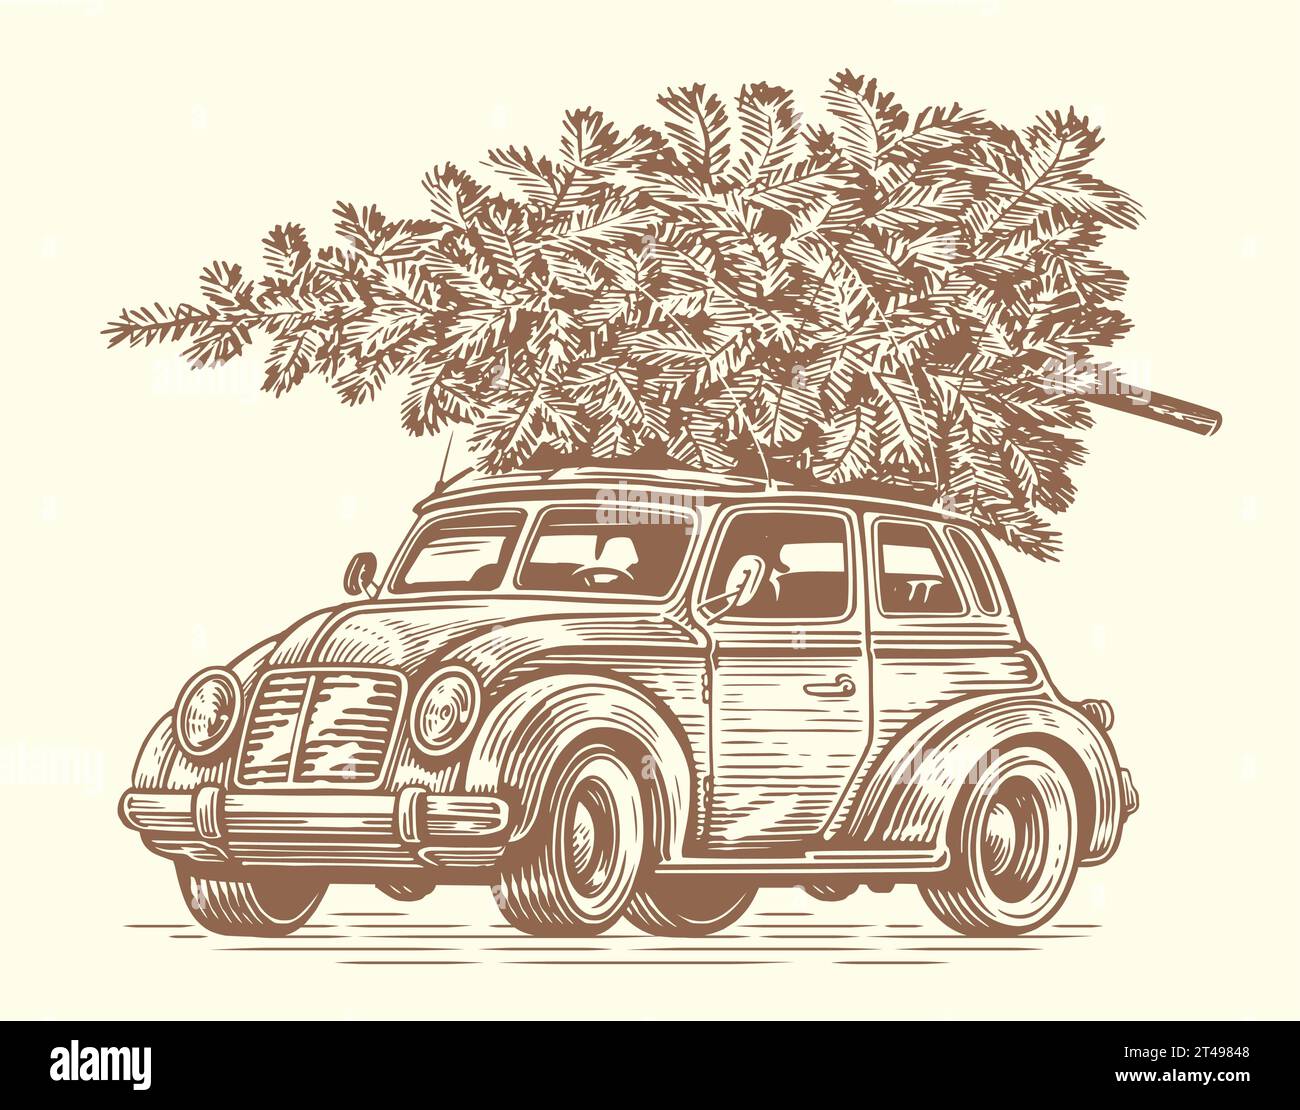 Retro car with a Christmas tree on top. Illustration in sketch style. Hand drawn vector art Stock Vector